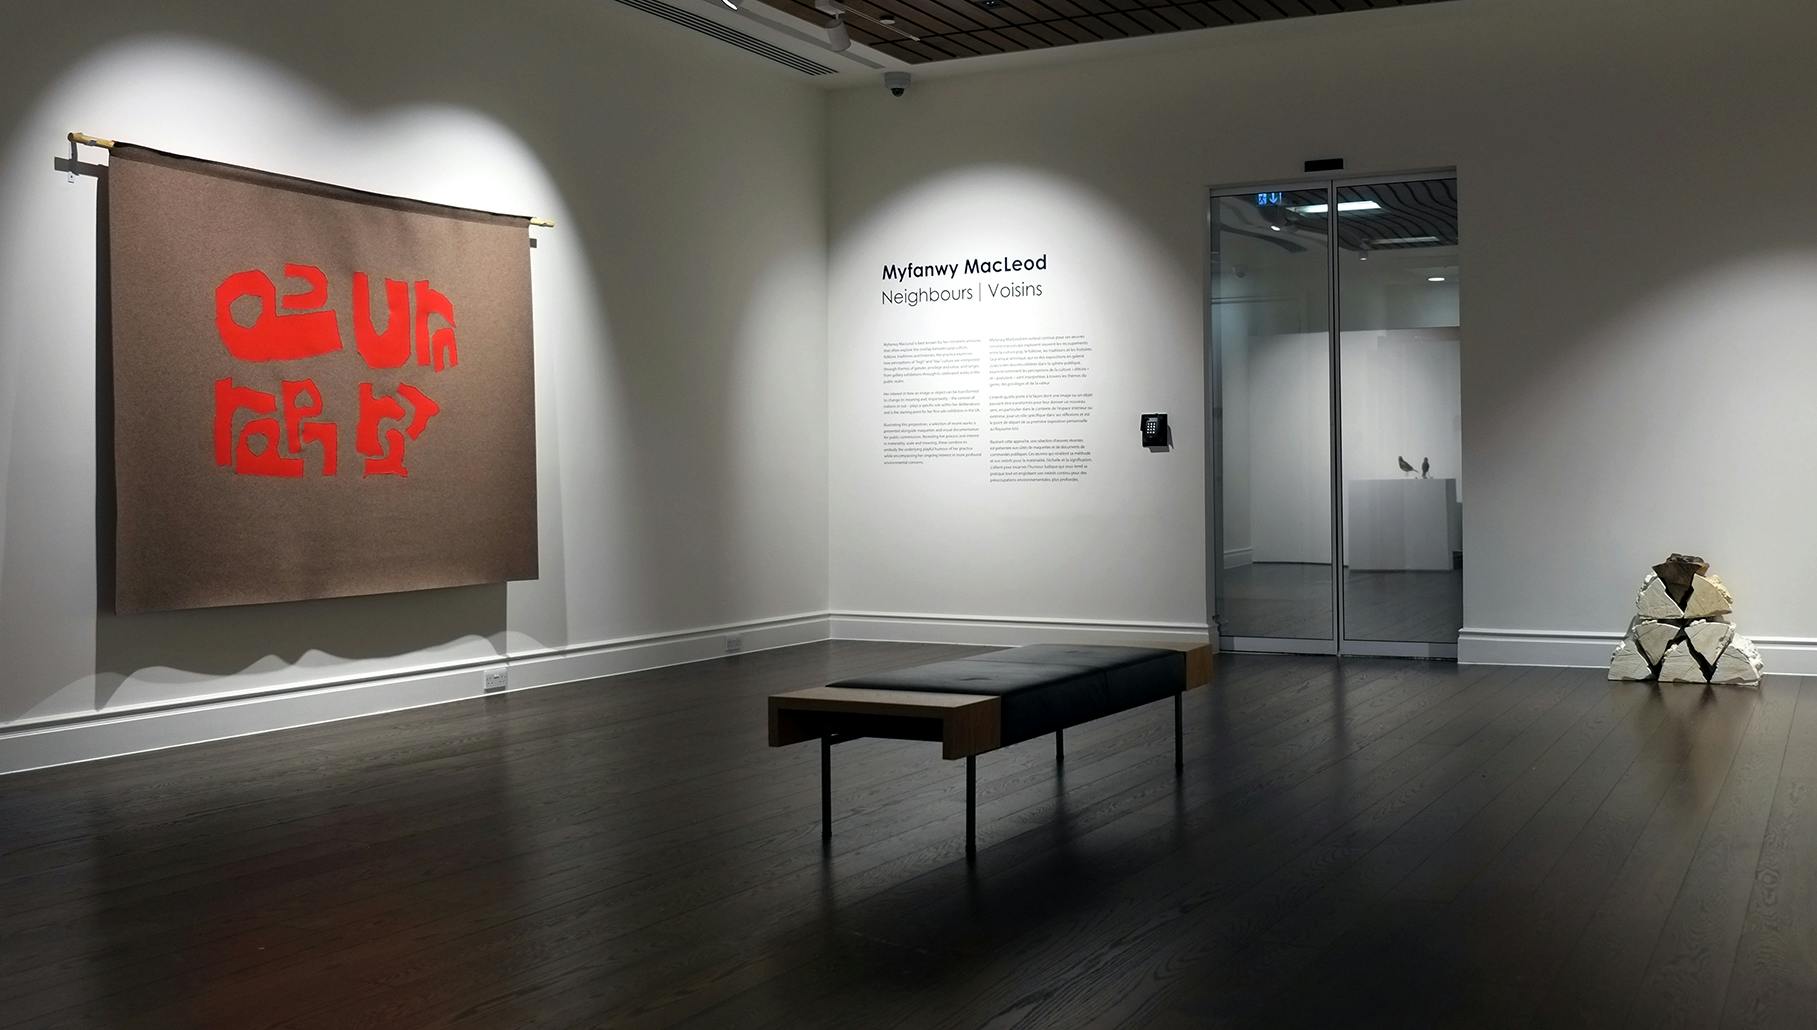 A view of Myfanwy MacLeod’s exhibition in a gallery. On the left wall, brown fabric with red shapes hangs off a curtain pole. On the right side,  a pile of plaster cast wooden logs sit on the floor.